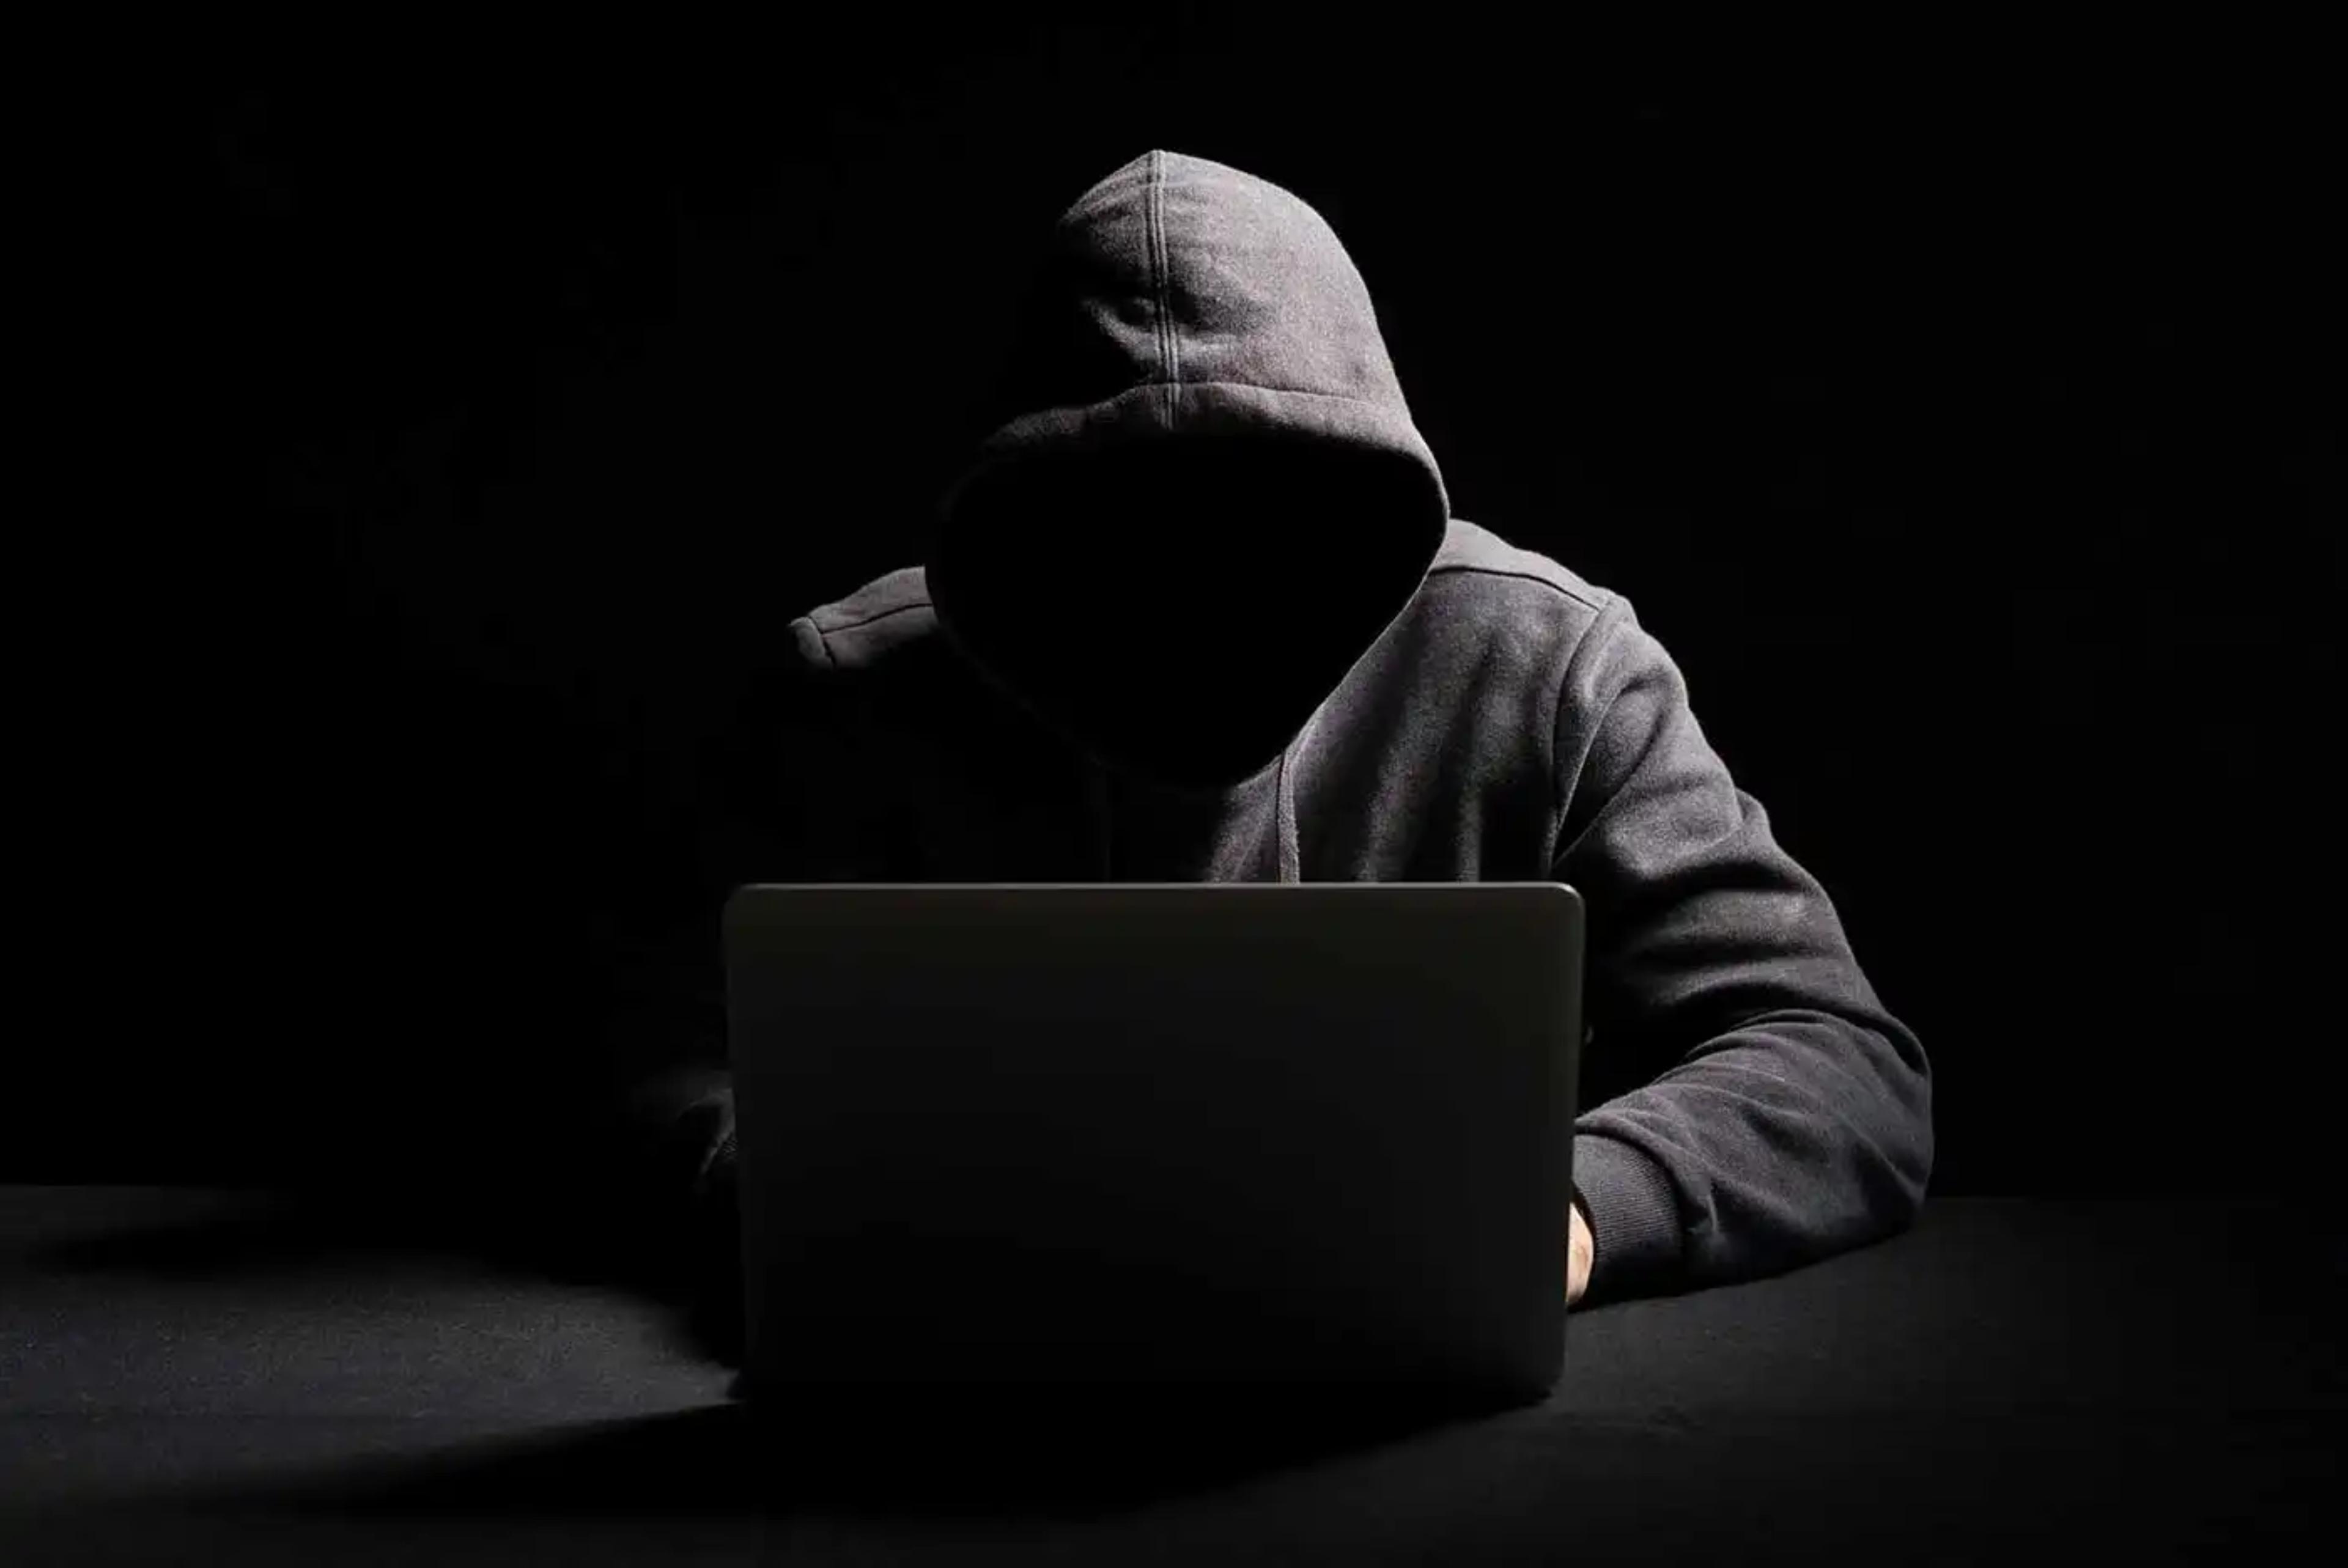 stereotypical image of a hacker working in a dark room at night not showing their face